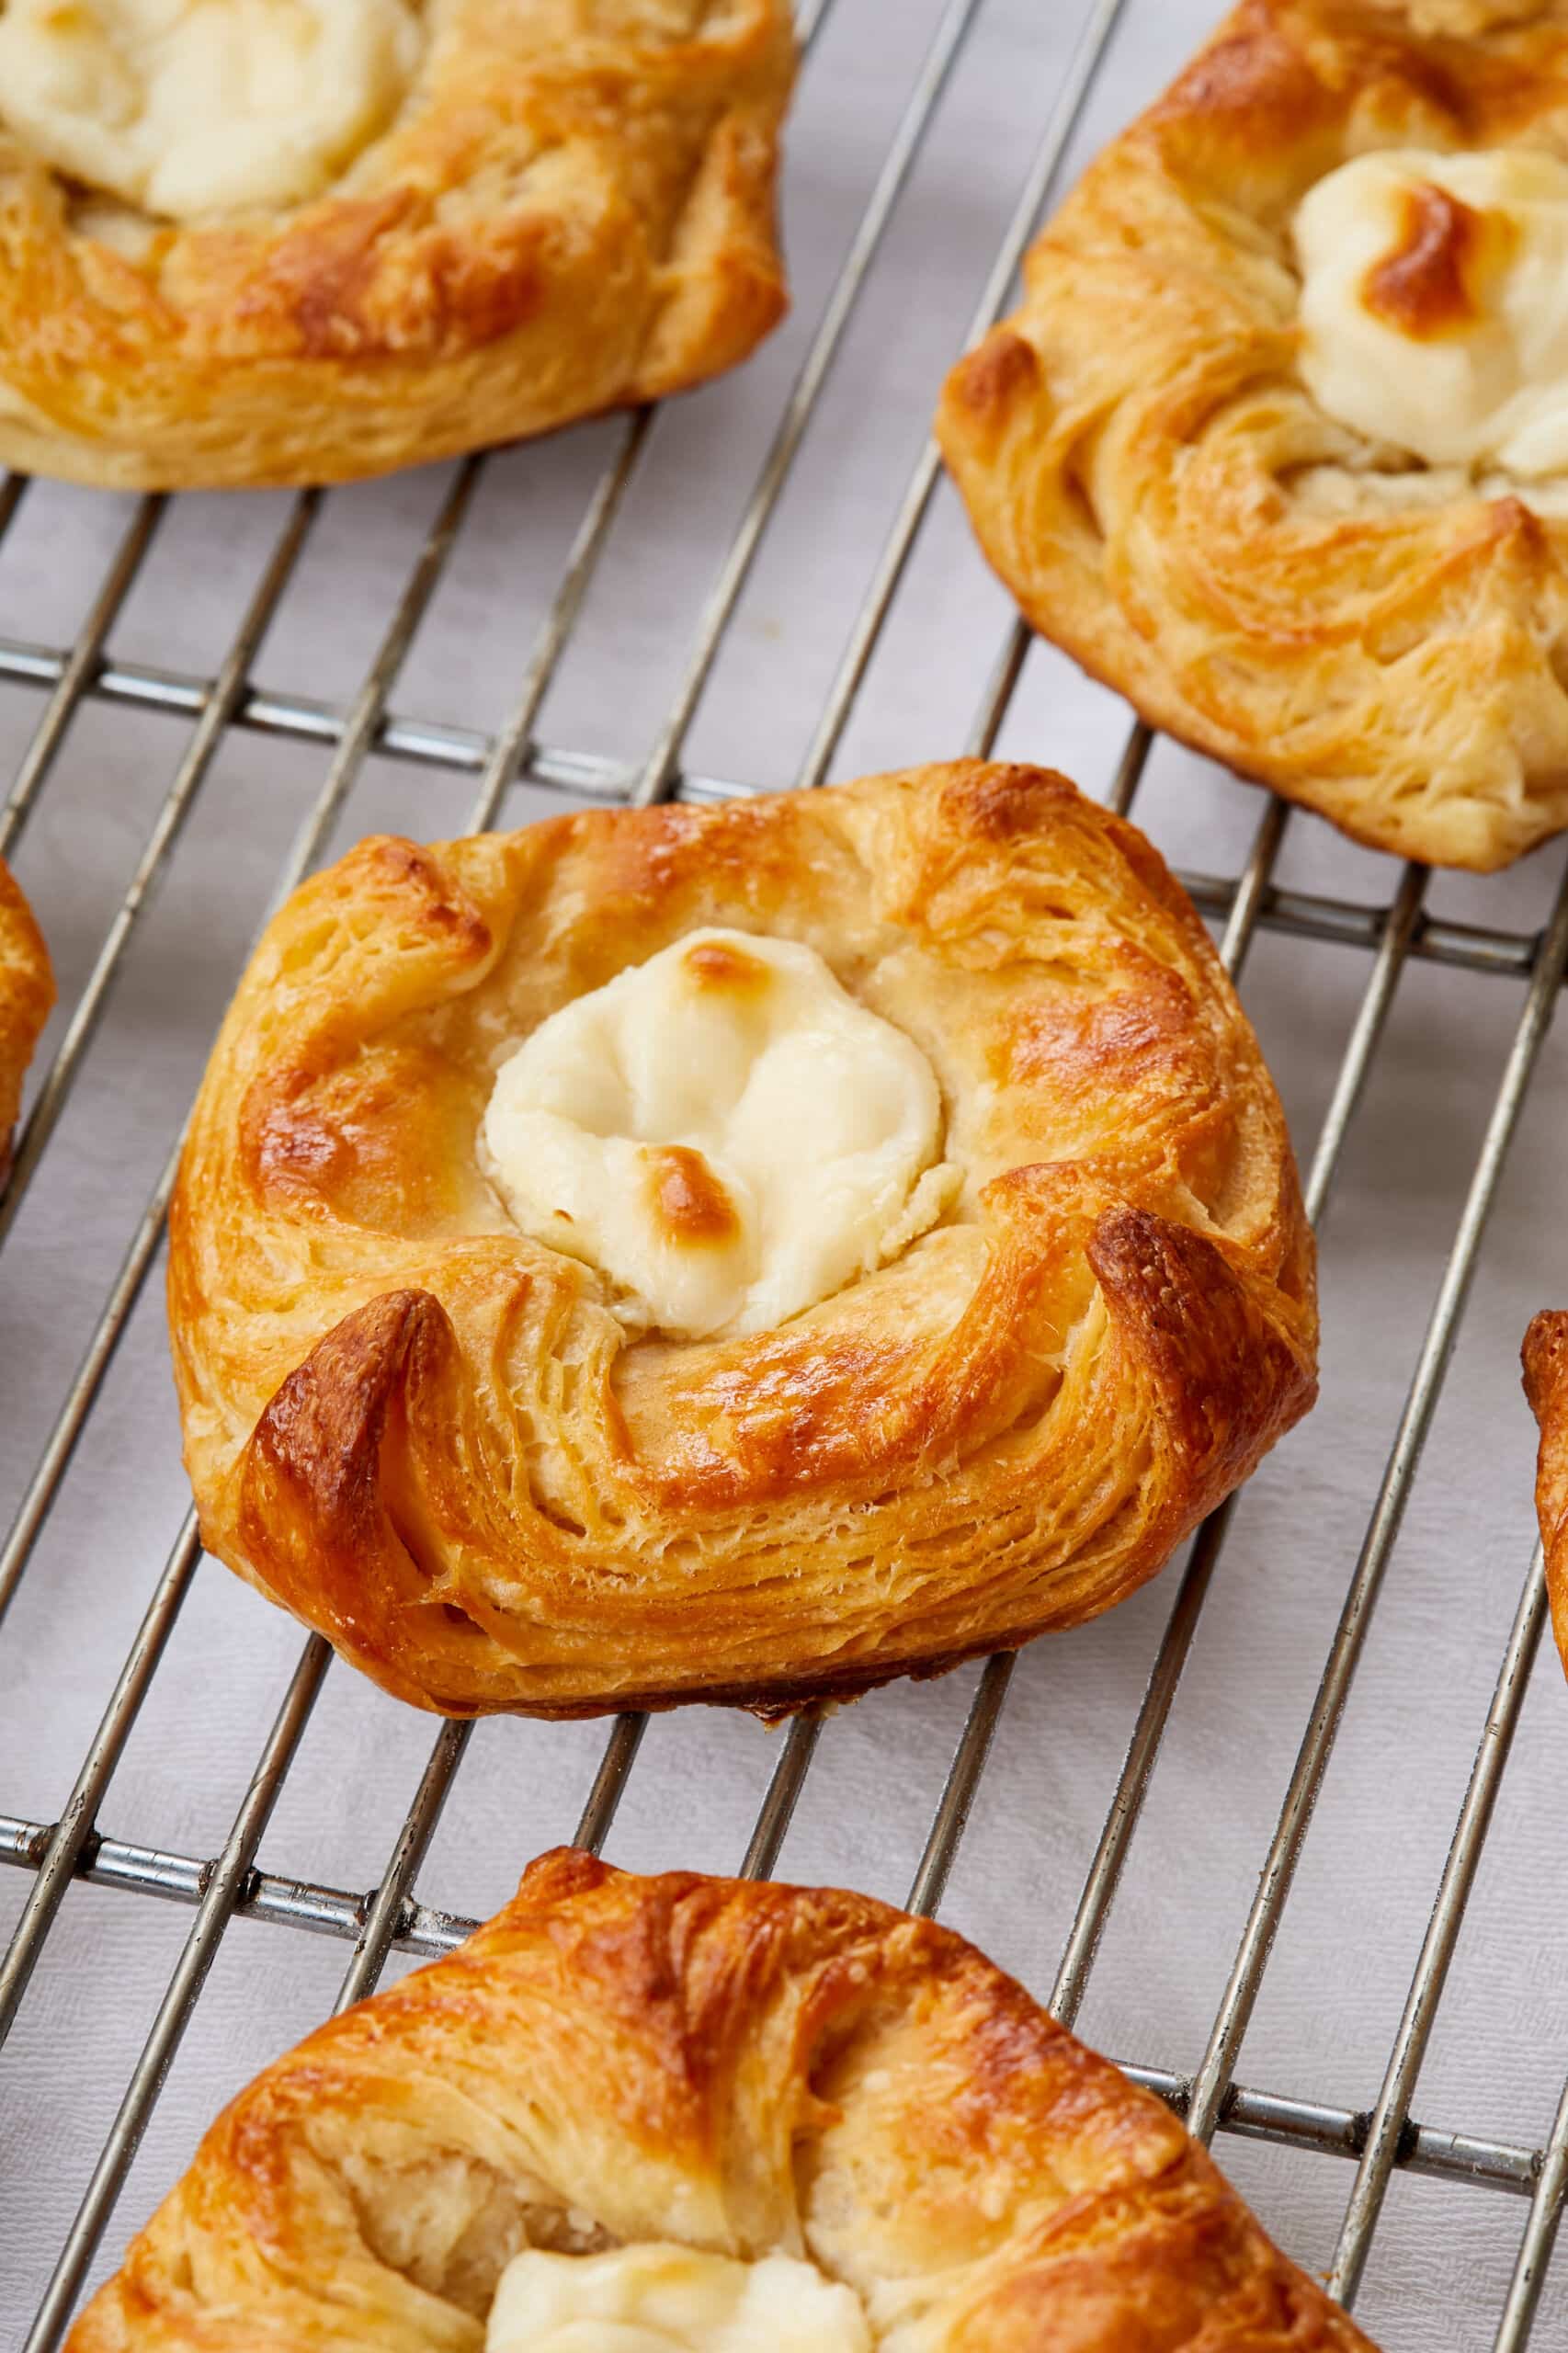 Golden, flaky Cheese Danish are cooling on a wire rack.